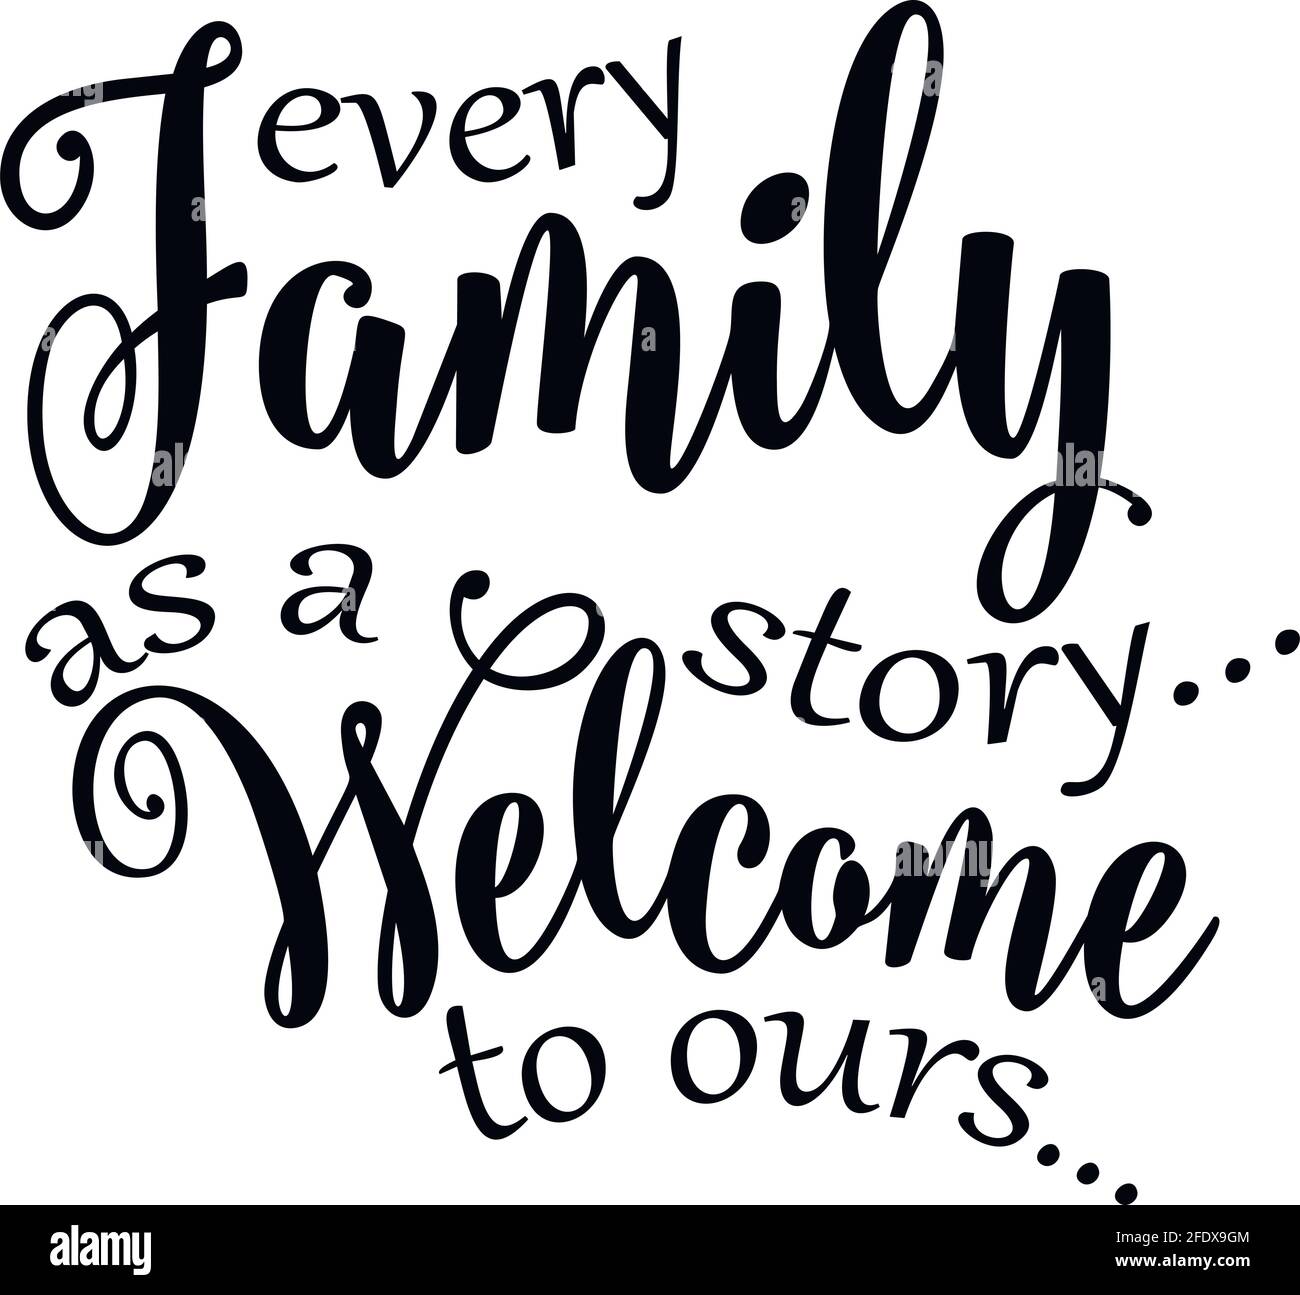 family sayings, family files - Family Quotes, family sign, Home ...